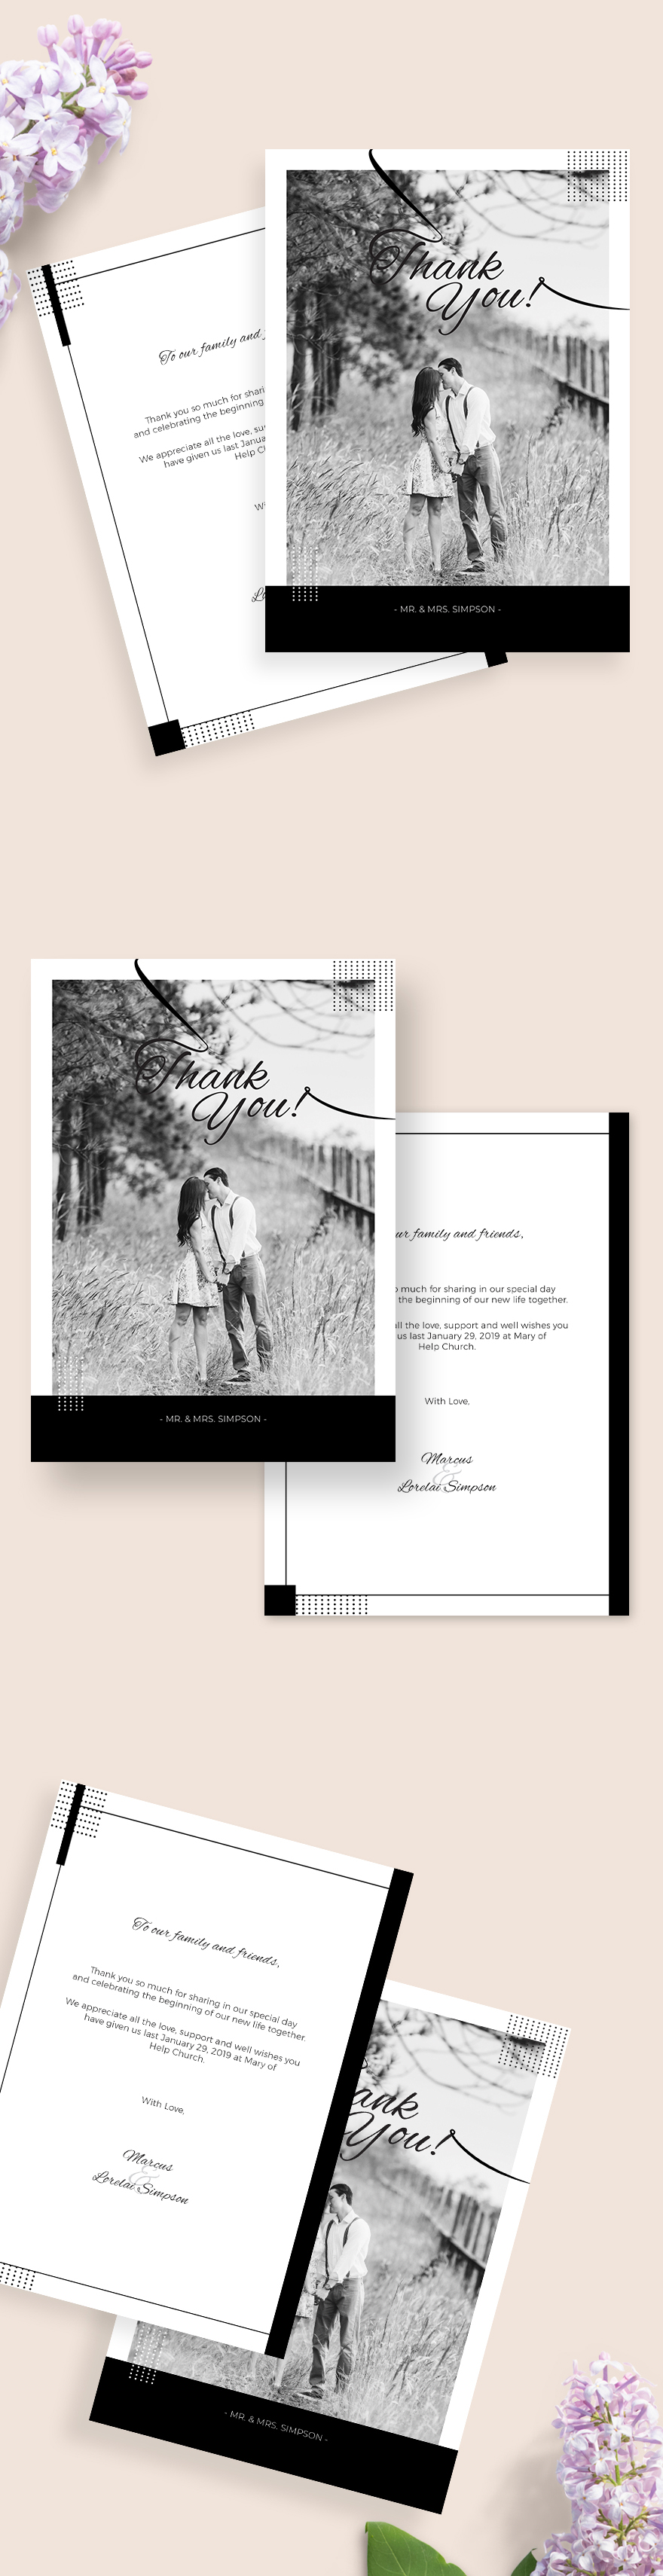 rustic-wedding-thank-you-card-template-illustrator-word-apple-pages-psd-publisher